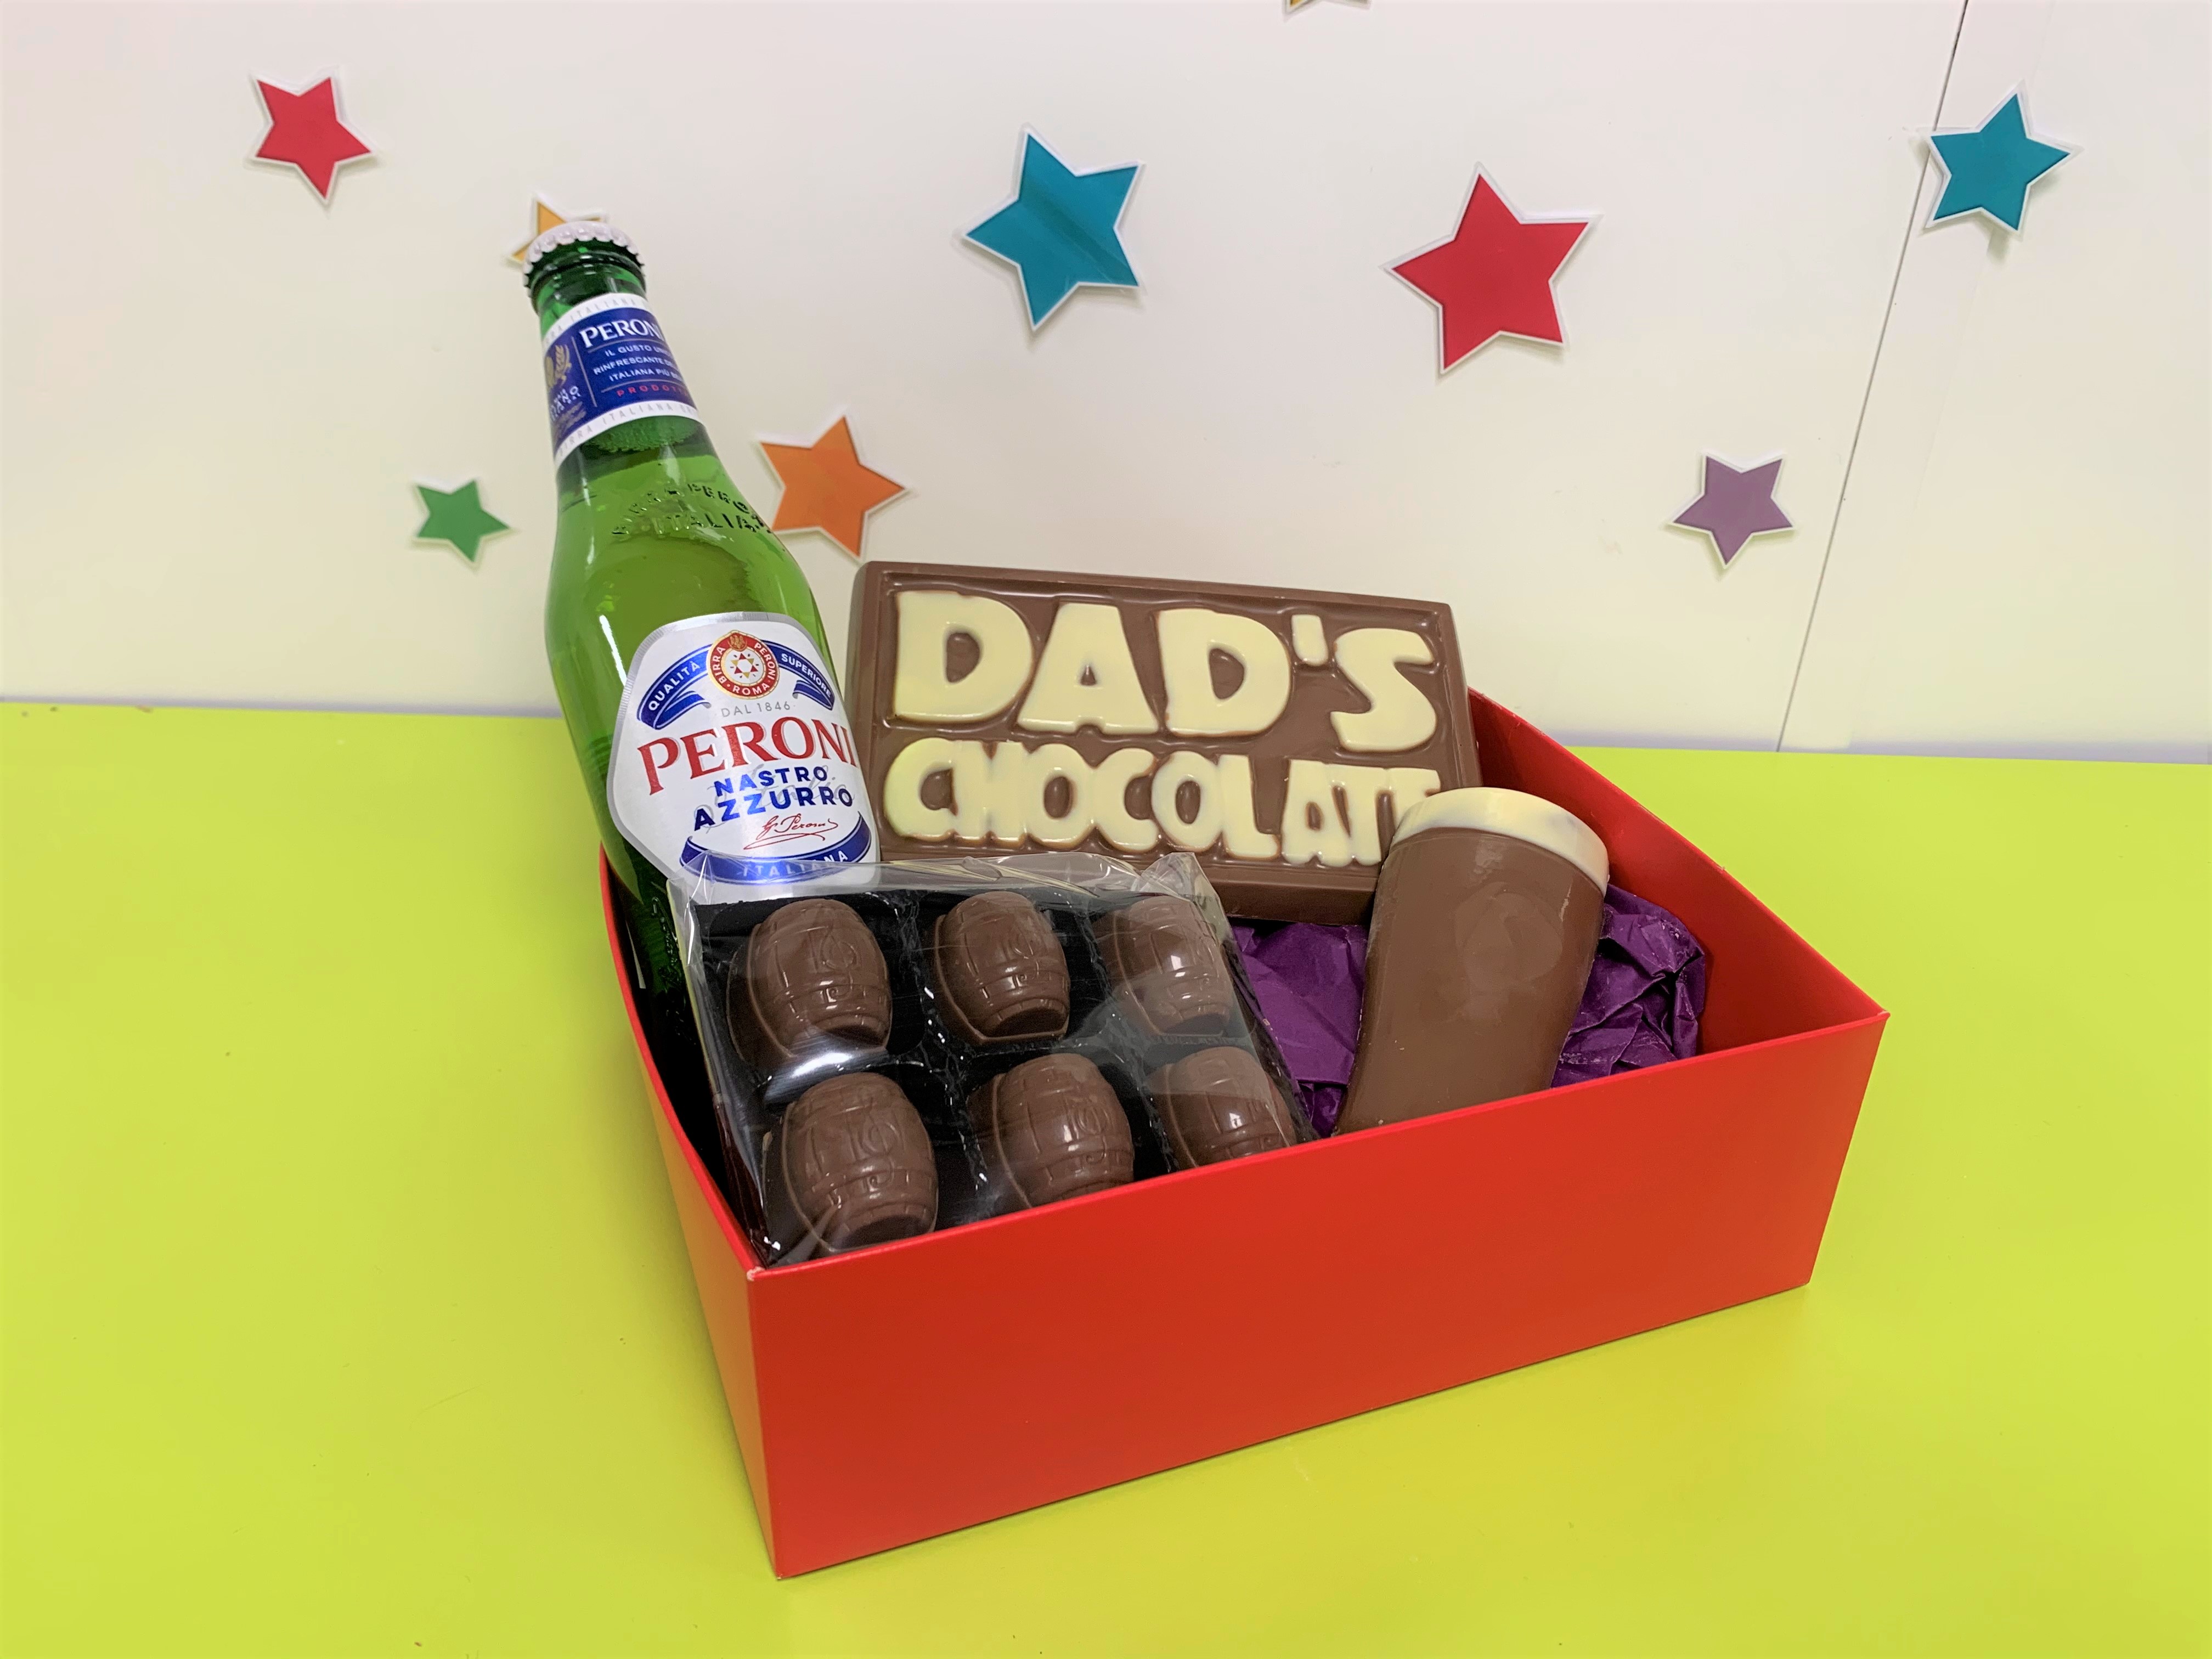 Beer gift sets: the best beer gifts for Father's Day 2021